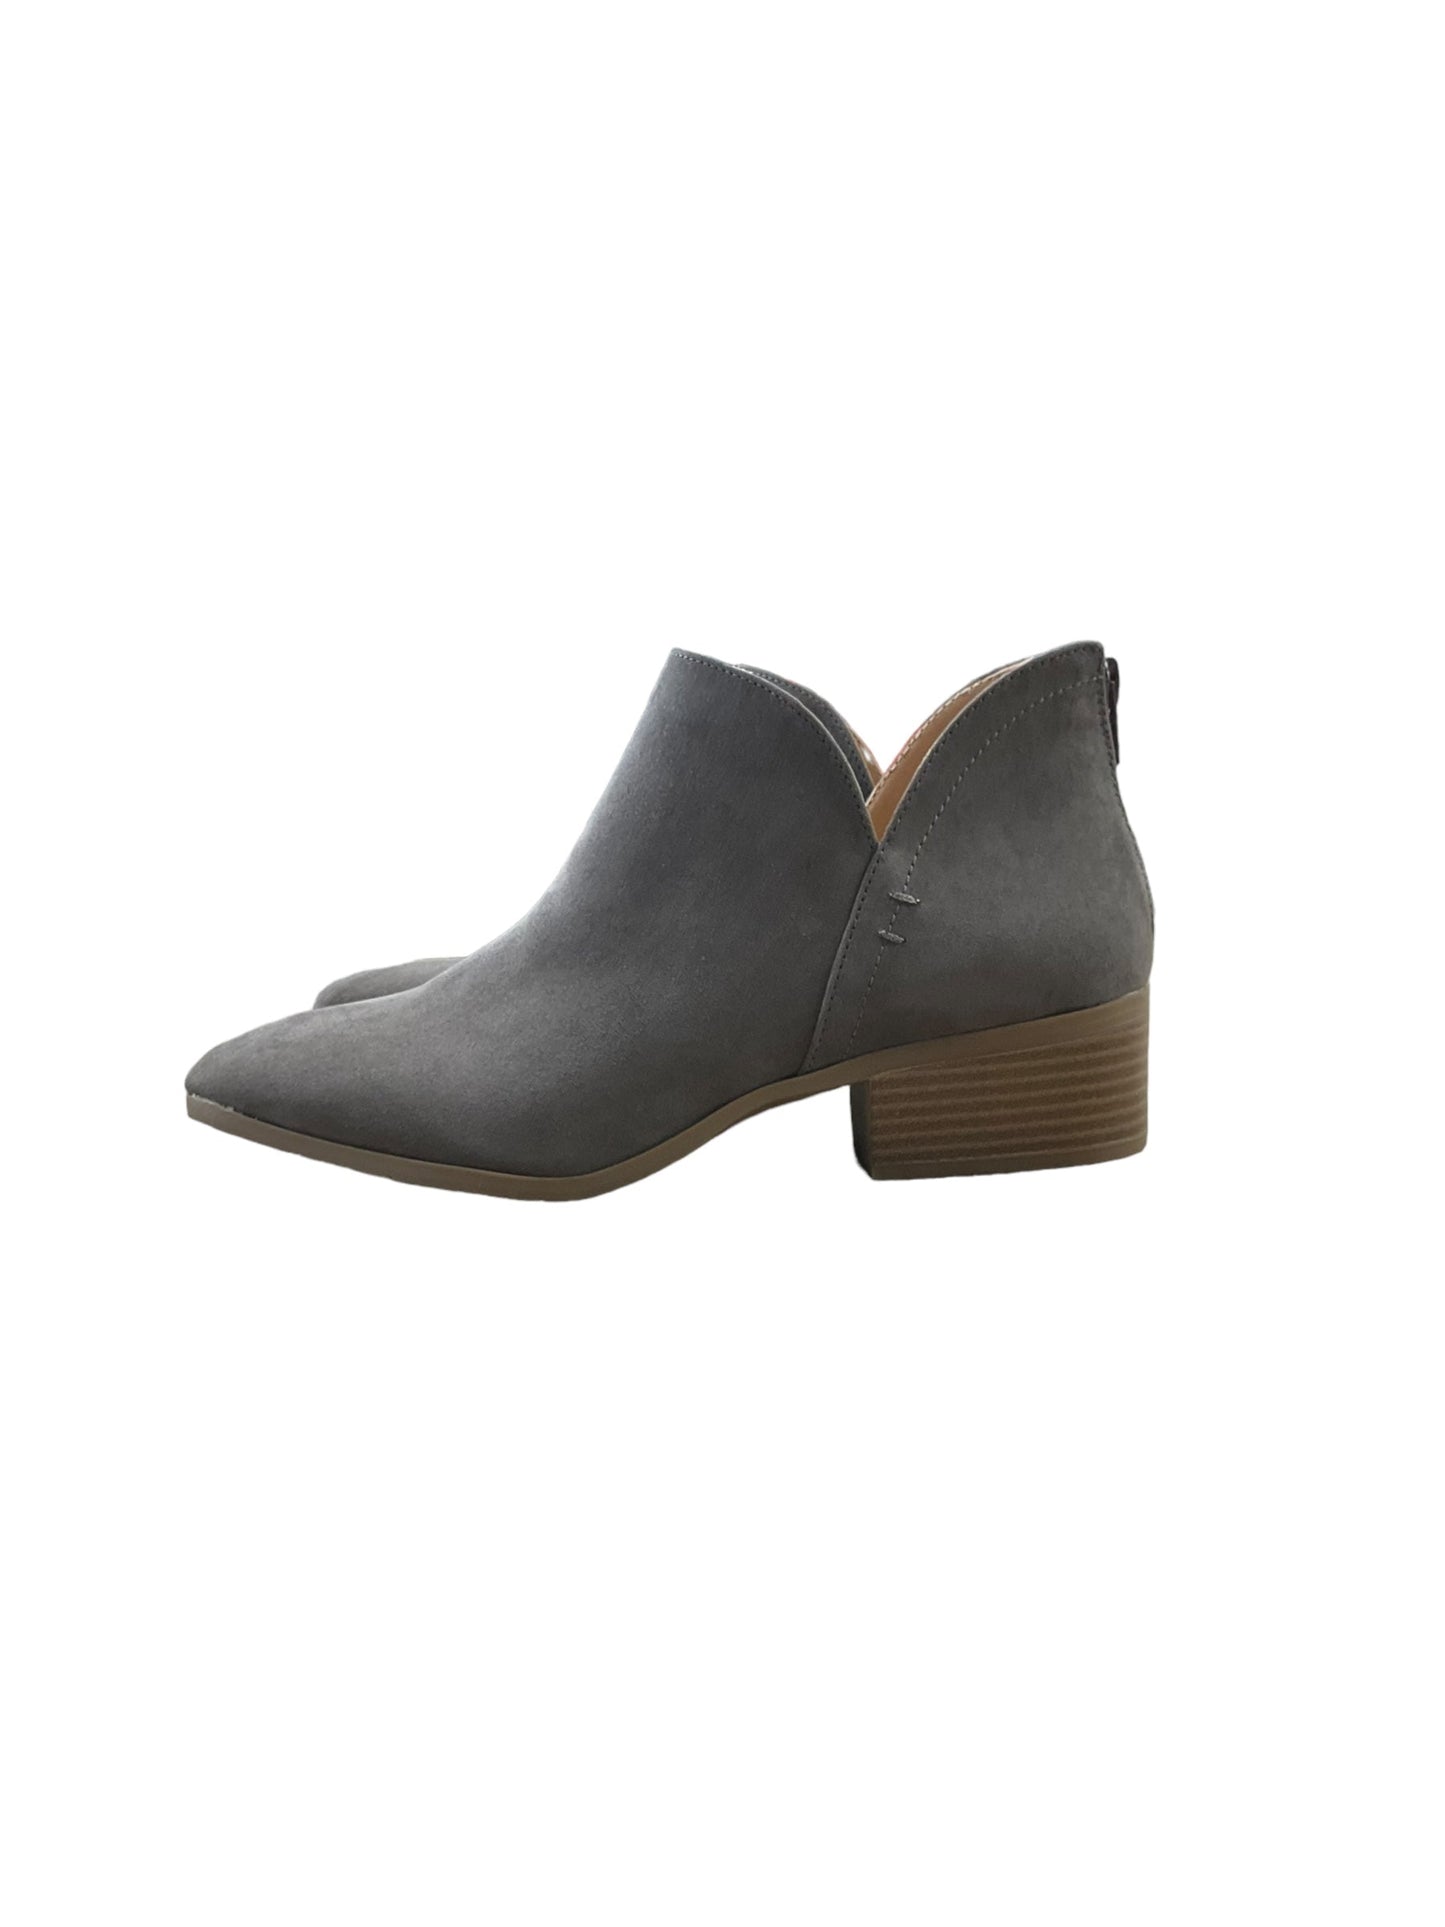 Boots Ankle Heels By Kenneth Cole Reaction  Size: 9.5